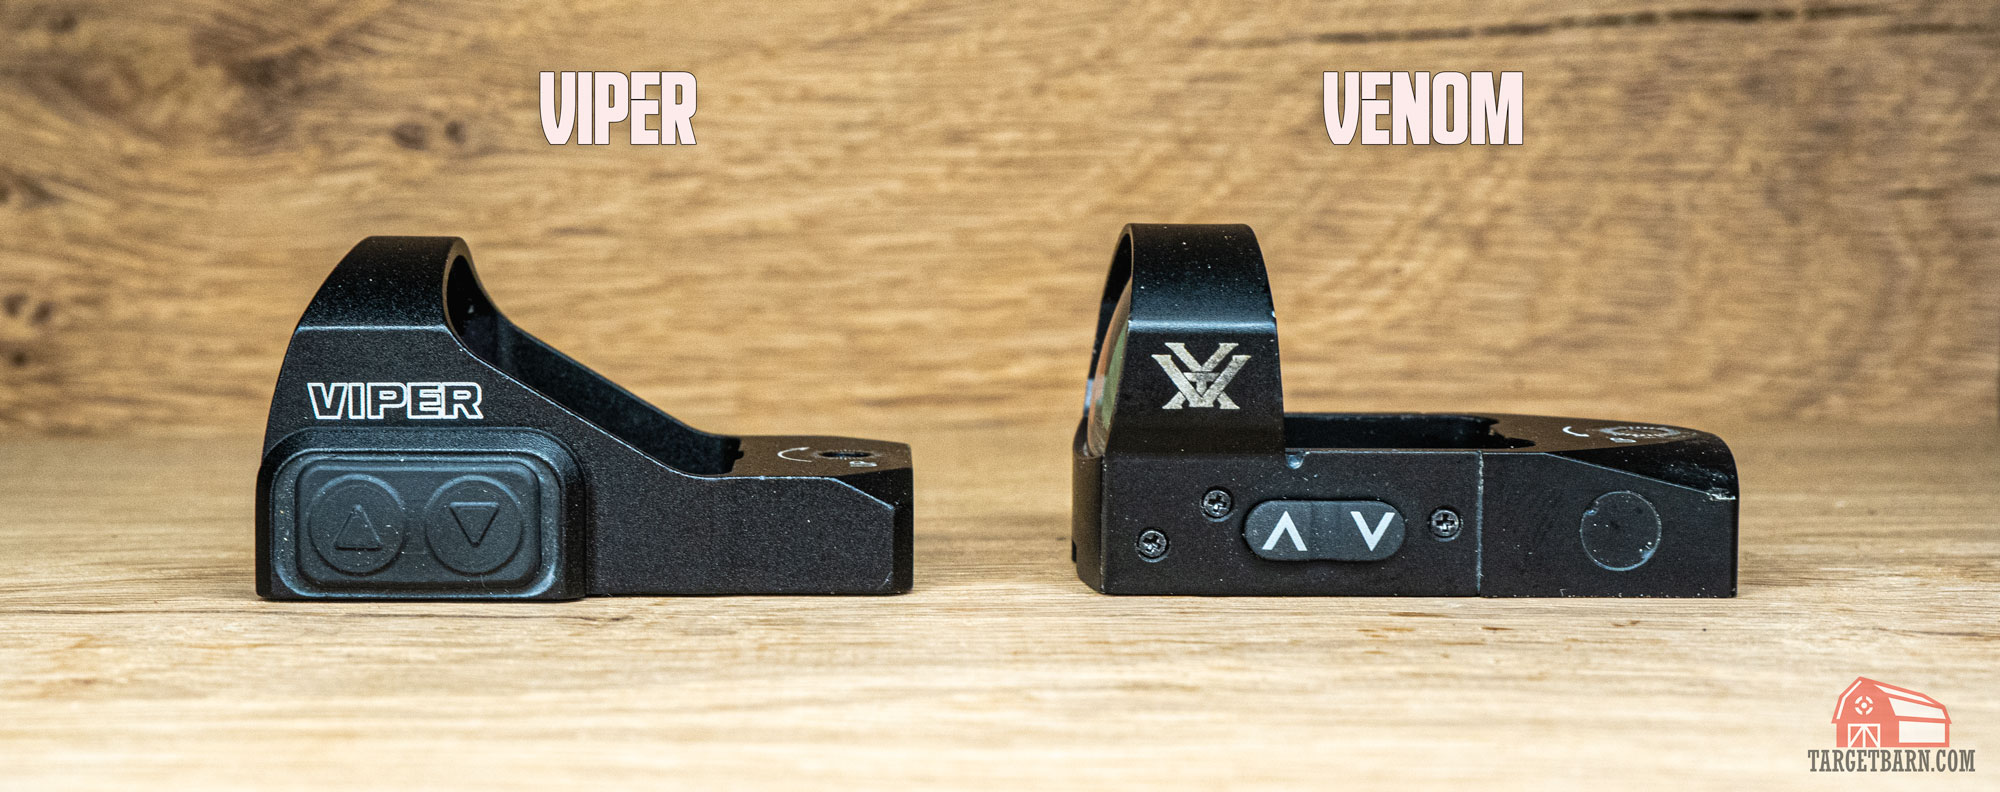 the vortex venom and viper next to each other, showing the brightness buttons